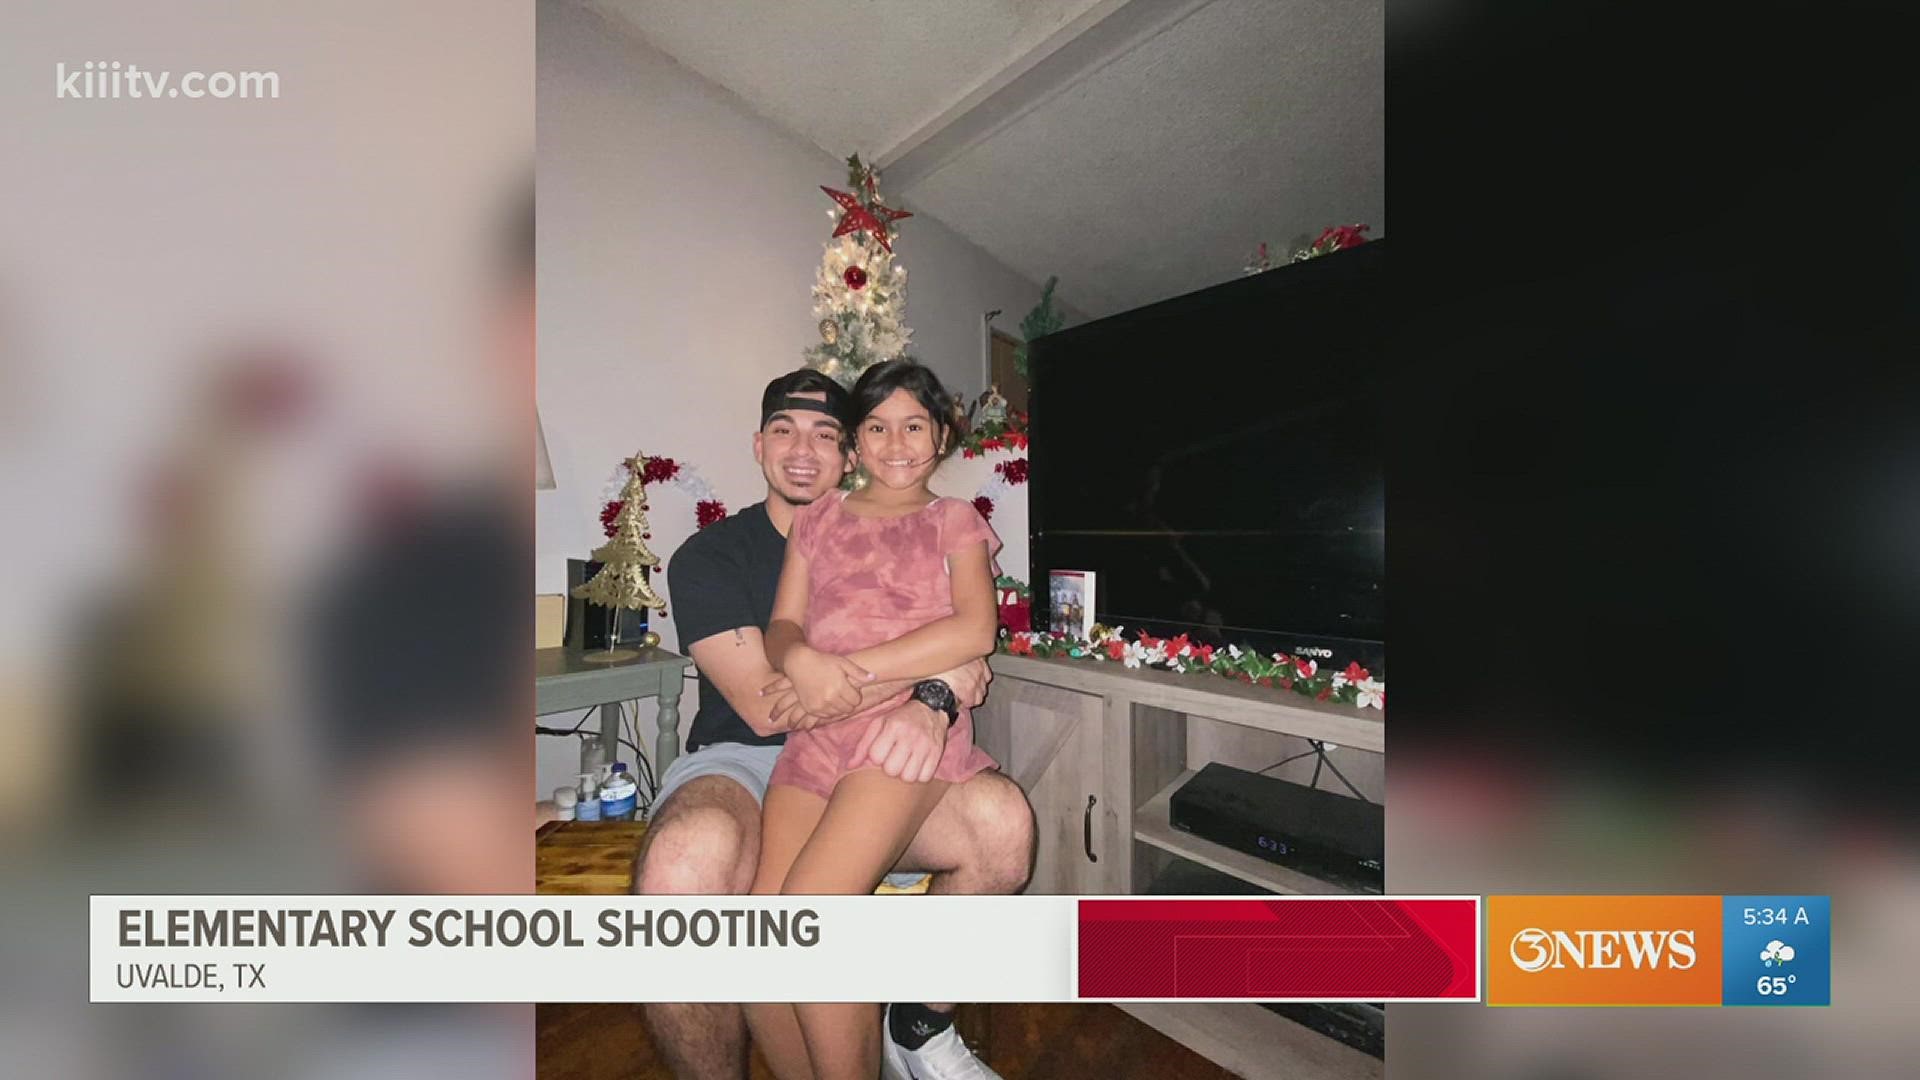 We are starting to learn more about the victims of the terrible shooting at an elementary school.